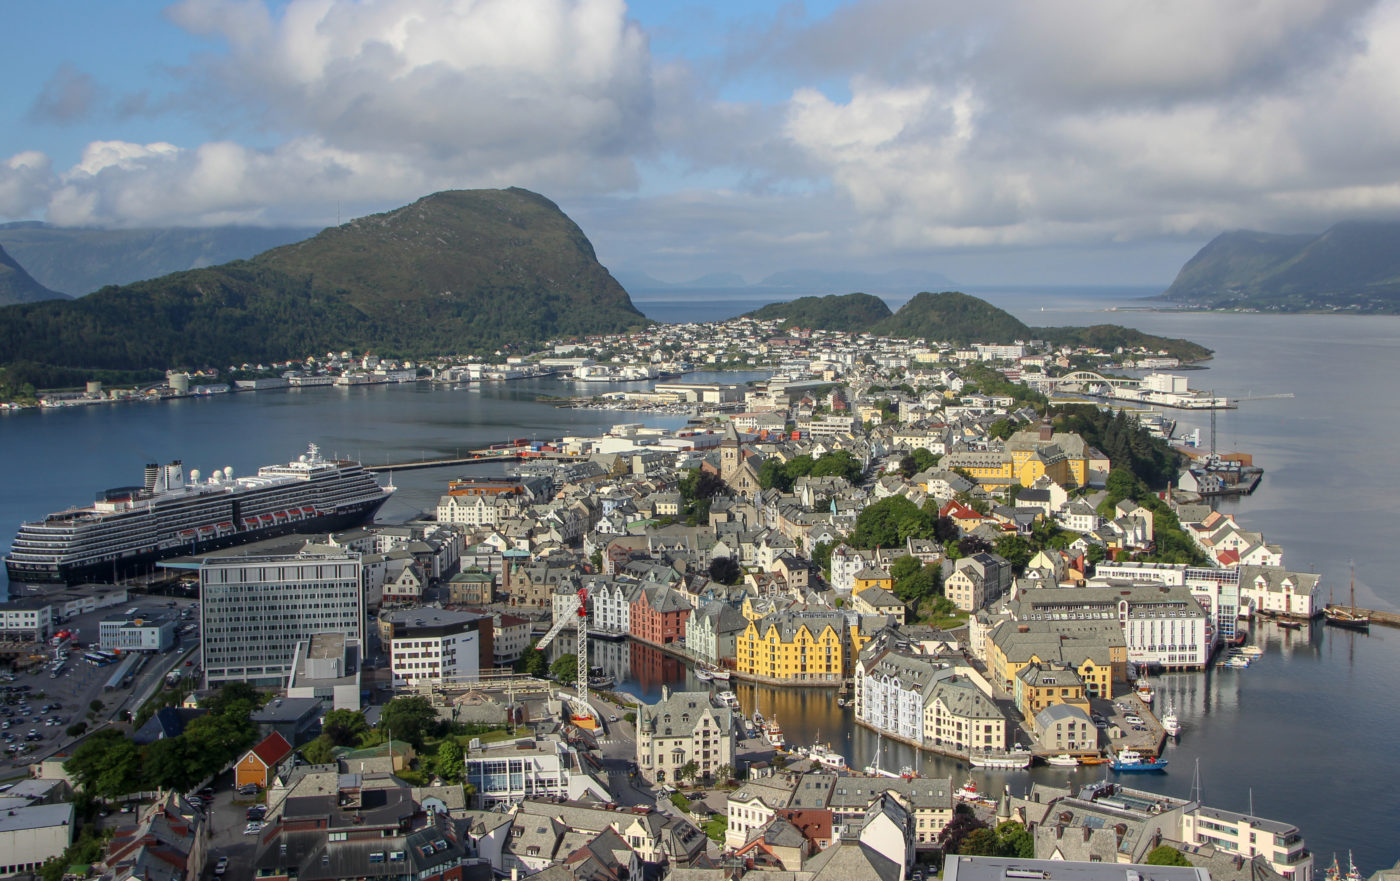 A Picturesque Walking Tour of Alesund, Norway Highlights